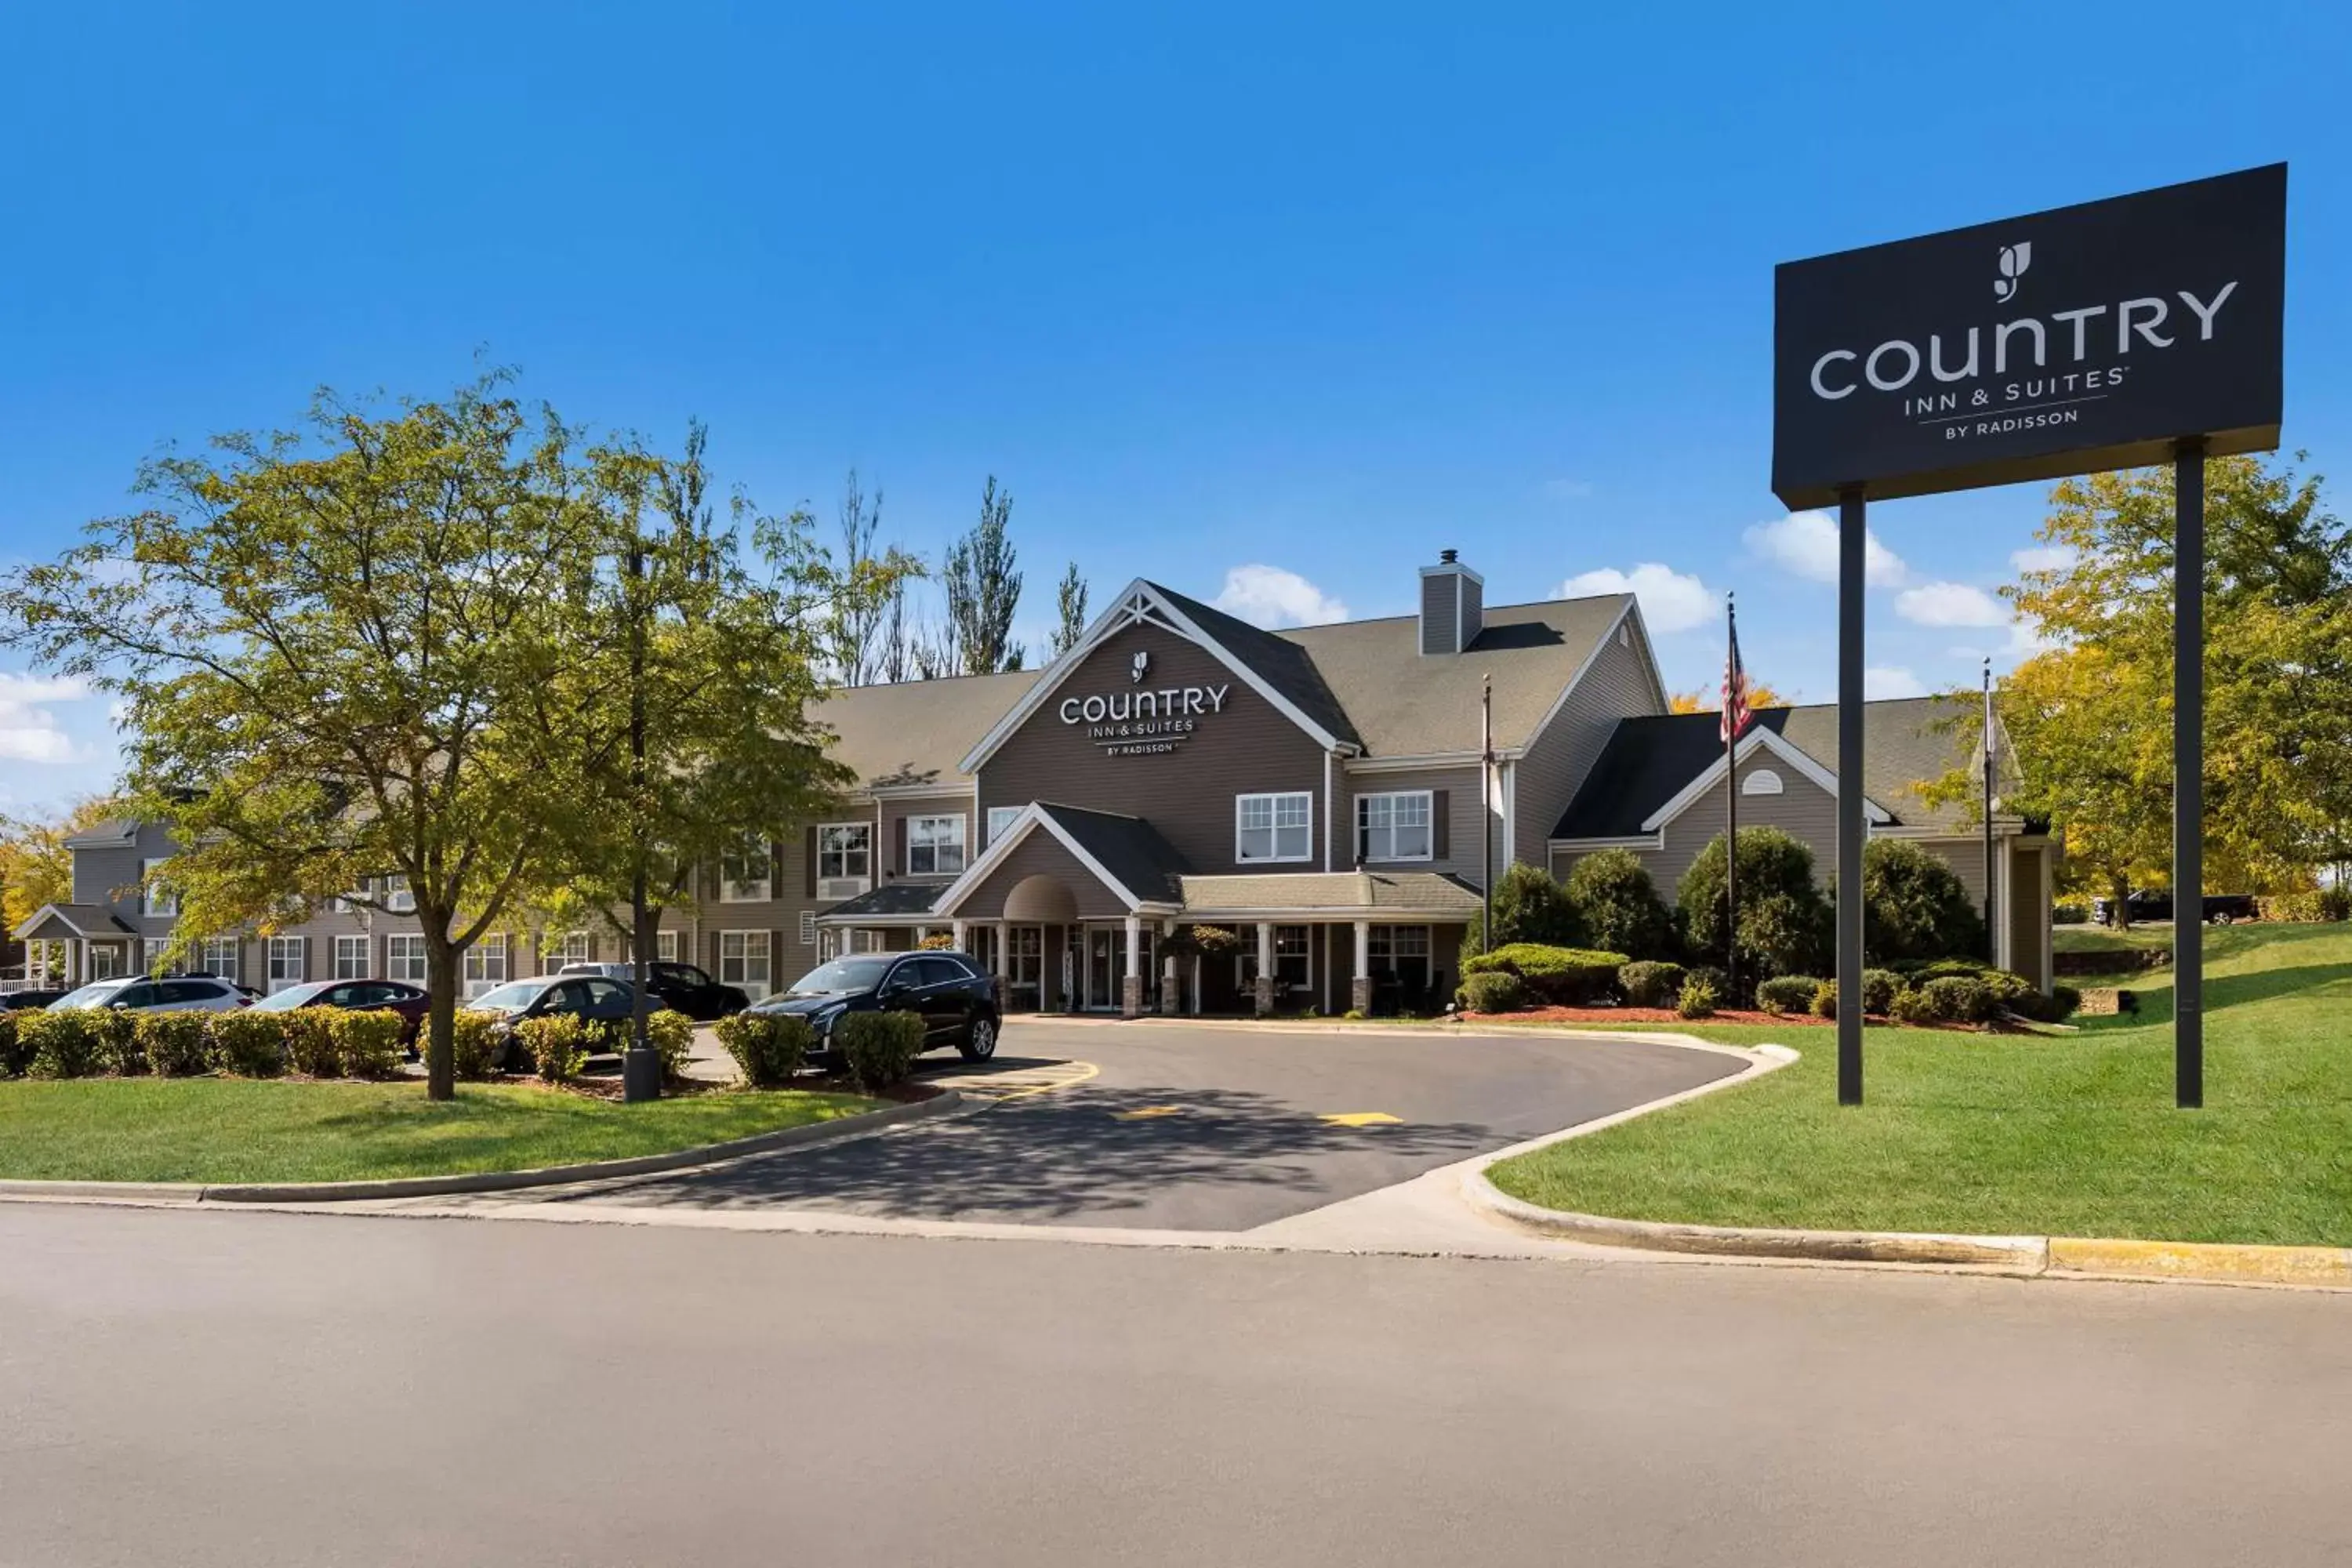 Property Building in Country Inn & Suites by Radisson, Freeport, IL